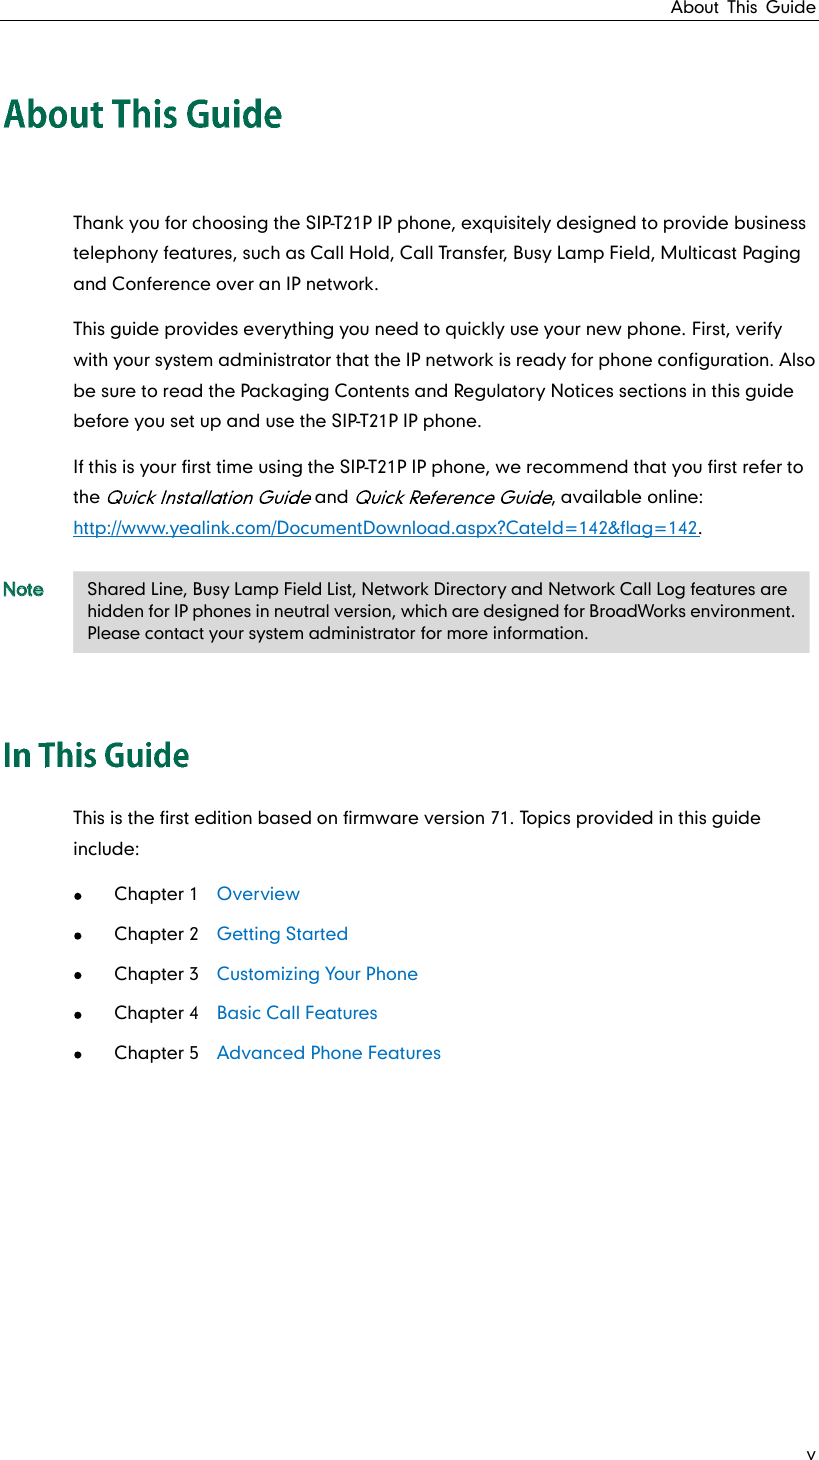 About This Guide v Thank you for choosing the SIP-T21P IP phone, exquisitely designed to provide business telephony features, such as Call Hold, Call Transfer, Busy Lamp Field, Multicast Paging and Conference over an IP network. This guide provides everything you need to quickly use your new phone. First, verify with your system administrator that the IP network is ready for phone configuration. Also be sure to read the Packaging Contents and Regulatory Notices sections in this guide before you set up and use the SIP-T21P IP phone. If this is your first time using the SIP-T21P IP phone, we recommend that you first refer to the   and  , available online: http://www.yealink.com/DocumentDownload.aspx?CateId=142&amp;flag=142. Note This is the first edition based on firmware version 71. Topics provided in this guide include:  Chapter 1  Overview  Chapter 2  Getting Started  Chapter 3   Customizing Your Phone  Chapter 4  Basic Call Features  Chapter 5  Advanced Phone Features     Shared Line, Busy Lamp Field List, Network Directory and Network Call Log features are hidden for IP phones in neutral version, which are designed for BroadWorks environment. Please contact your system administrator for more information. 